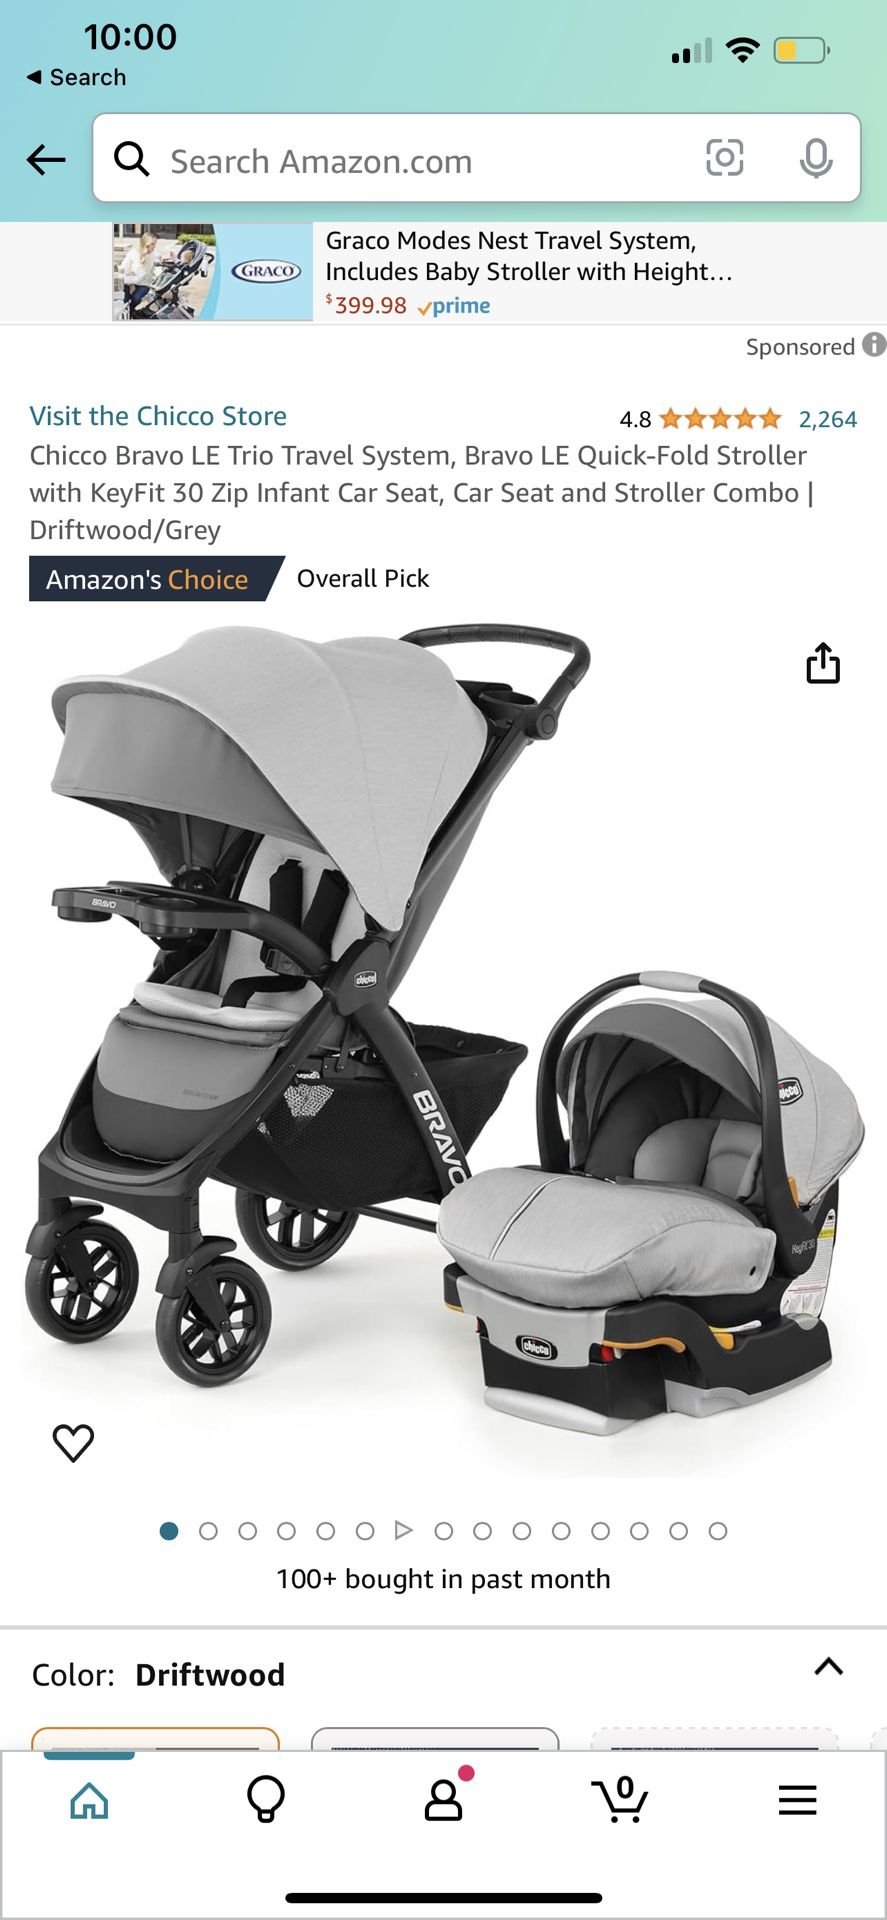 Chicco Bravo LE Trio Travel System, Bravo LE Quick-Fold Stroller with KeyFit 30 Zip Infant Car Seat